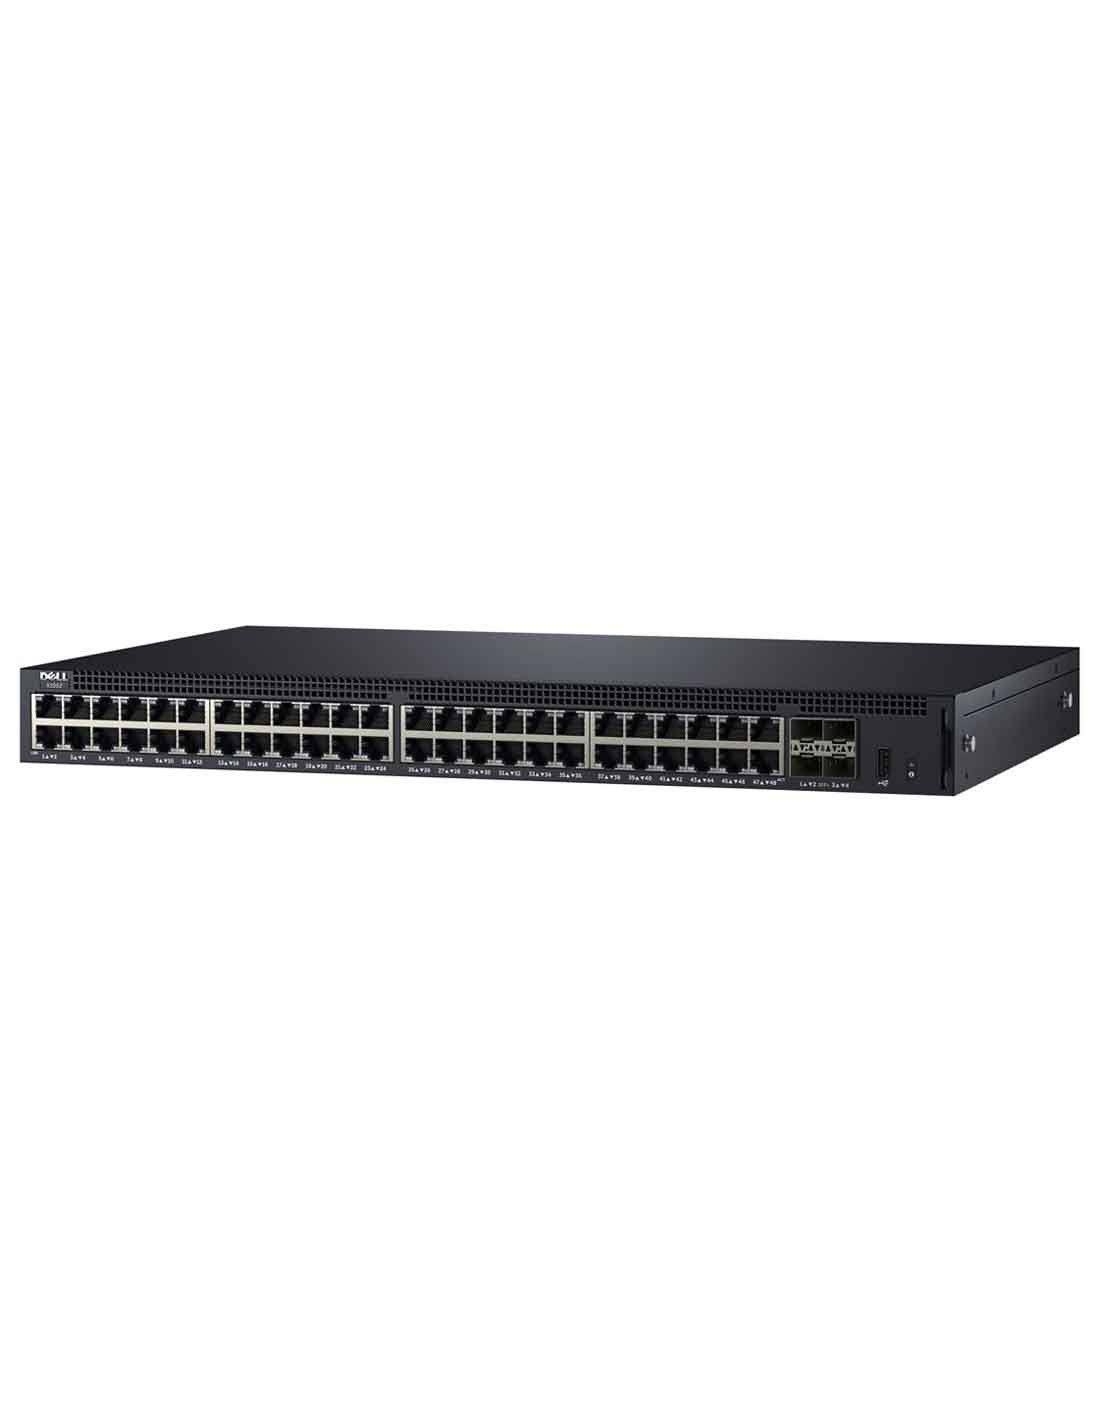 Dell Networking X1052 Managed Switch at a cheap price and fast free delivery in Dubai UAE